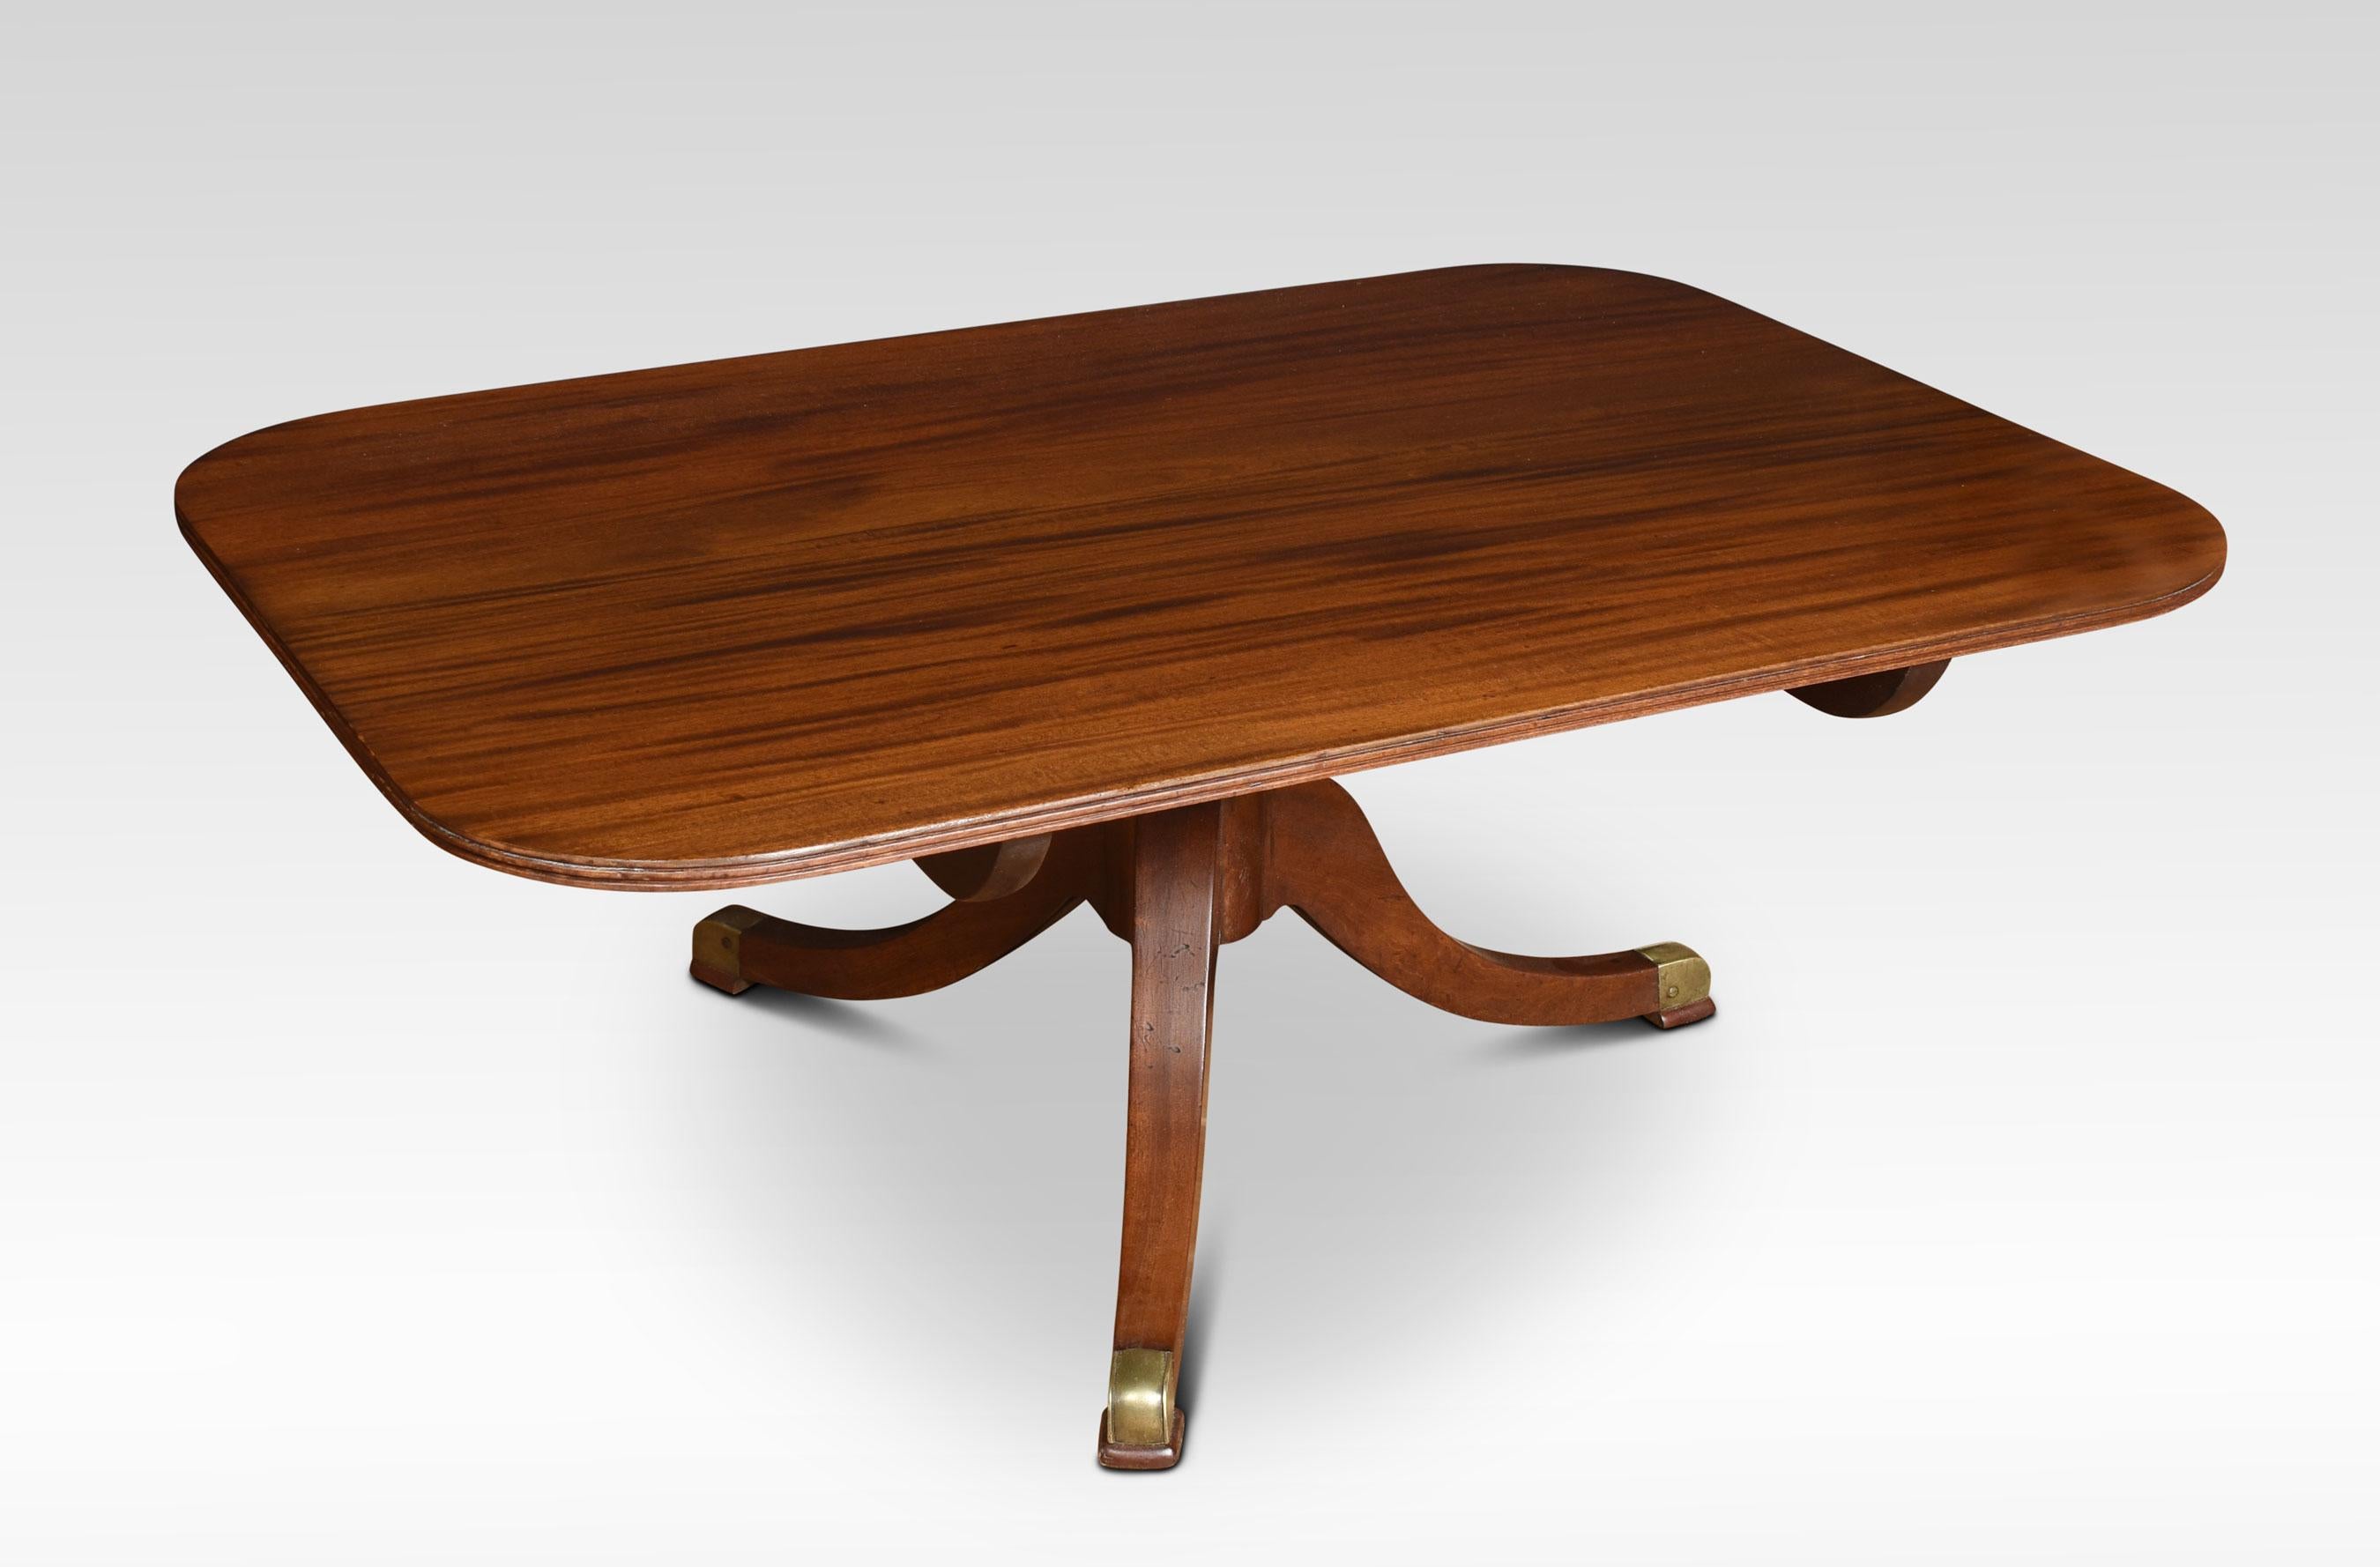 Mahogany Coffee Table In Good Condition For Sale In Cheshire, GB